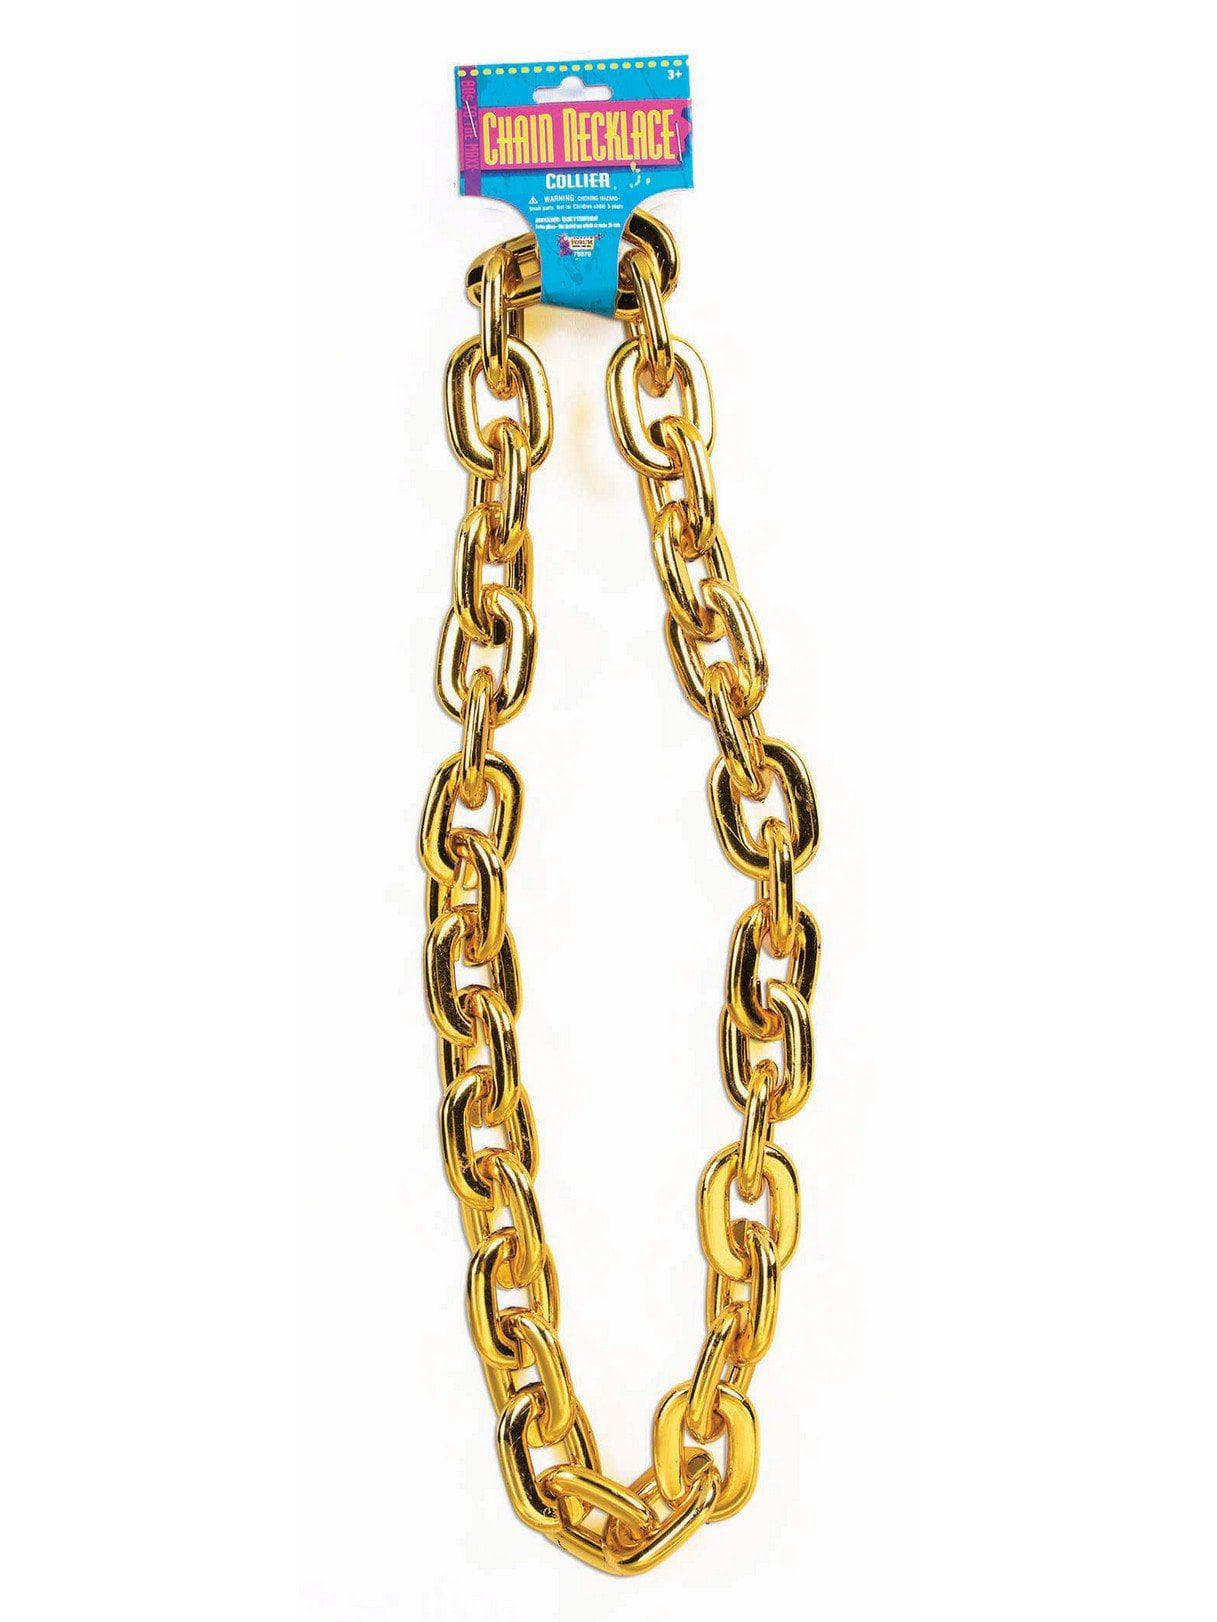 Adult Gold Jumbo Link Chain Necklace - costumes.com